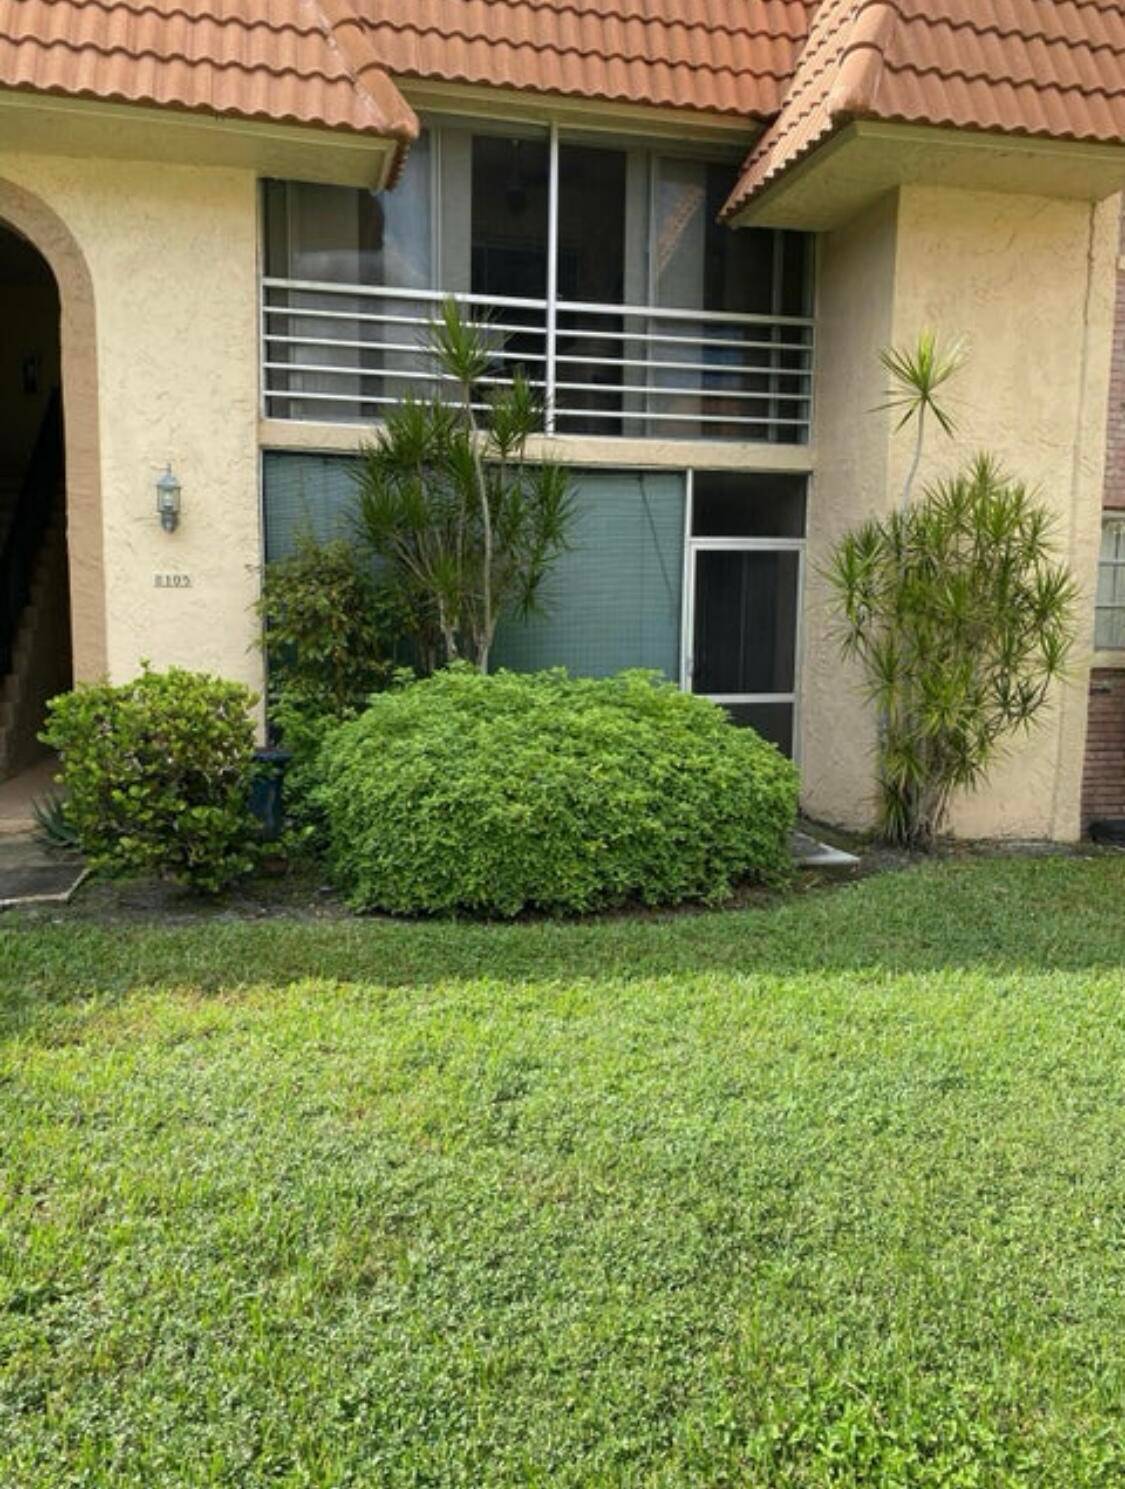 Unique opportunity to own one of the largest 3 bedroom condominiums in Coral Springs.